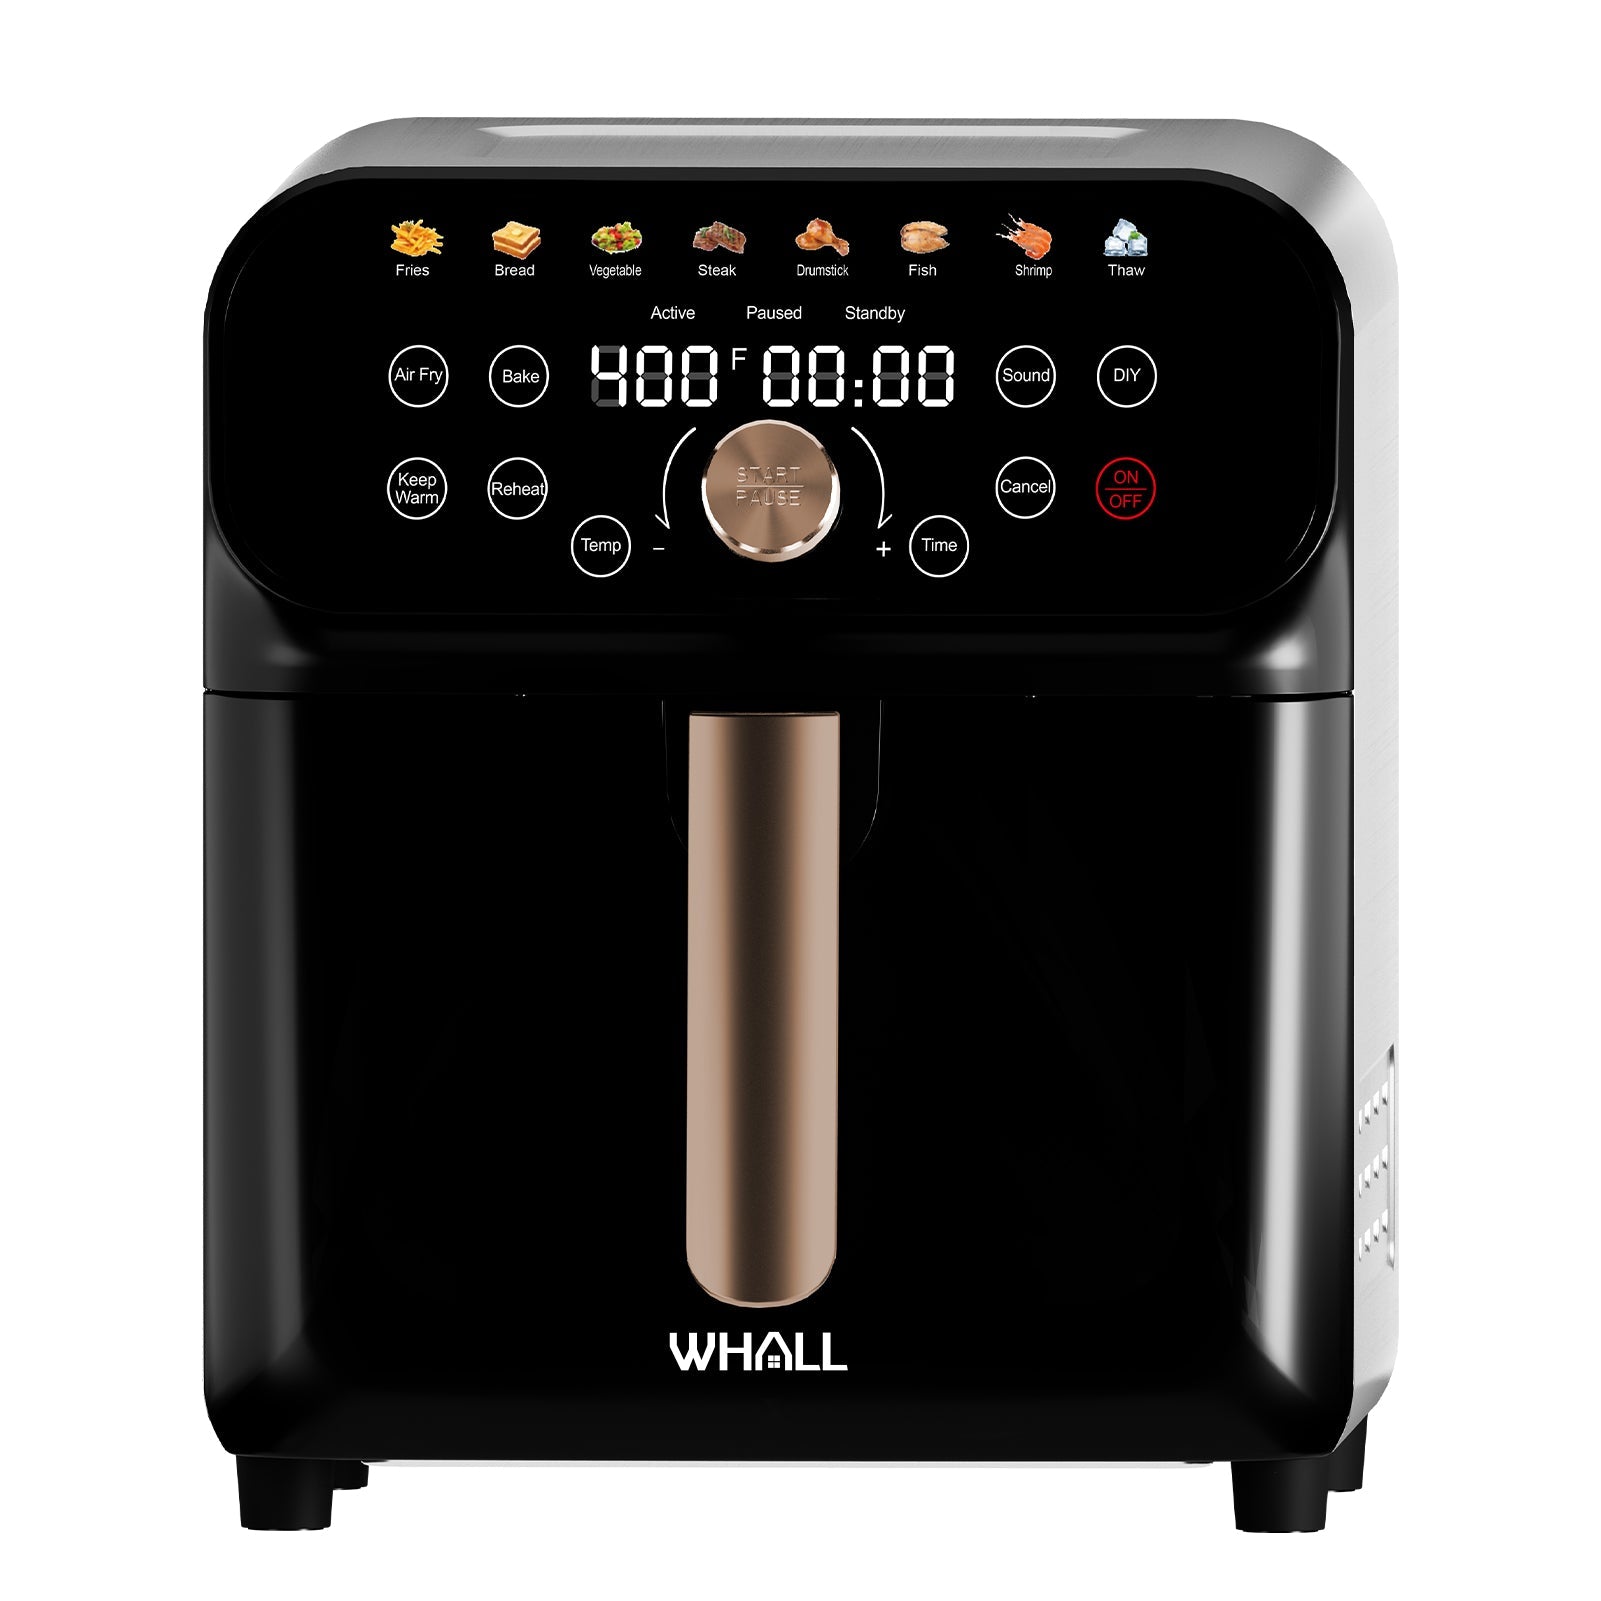 WHALL Air Fryer, 6.3Qt Air Fryer Oven with LED Digital Touchscreen, Custom Presets, Nonstick and Dishwasher-Safe Basket, Stainless Steel/1600W